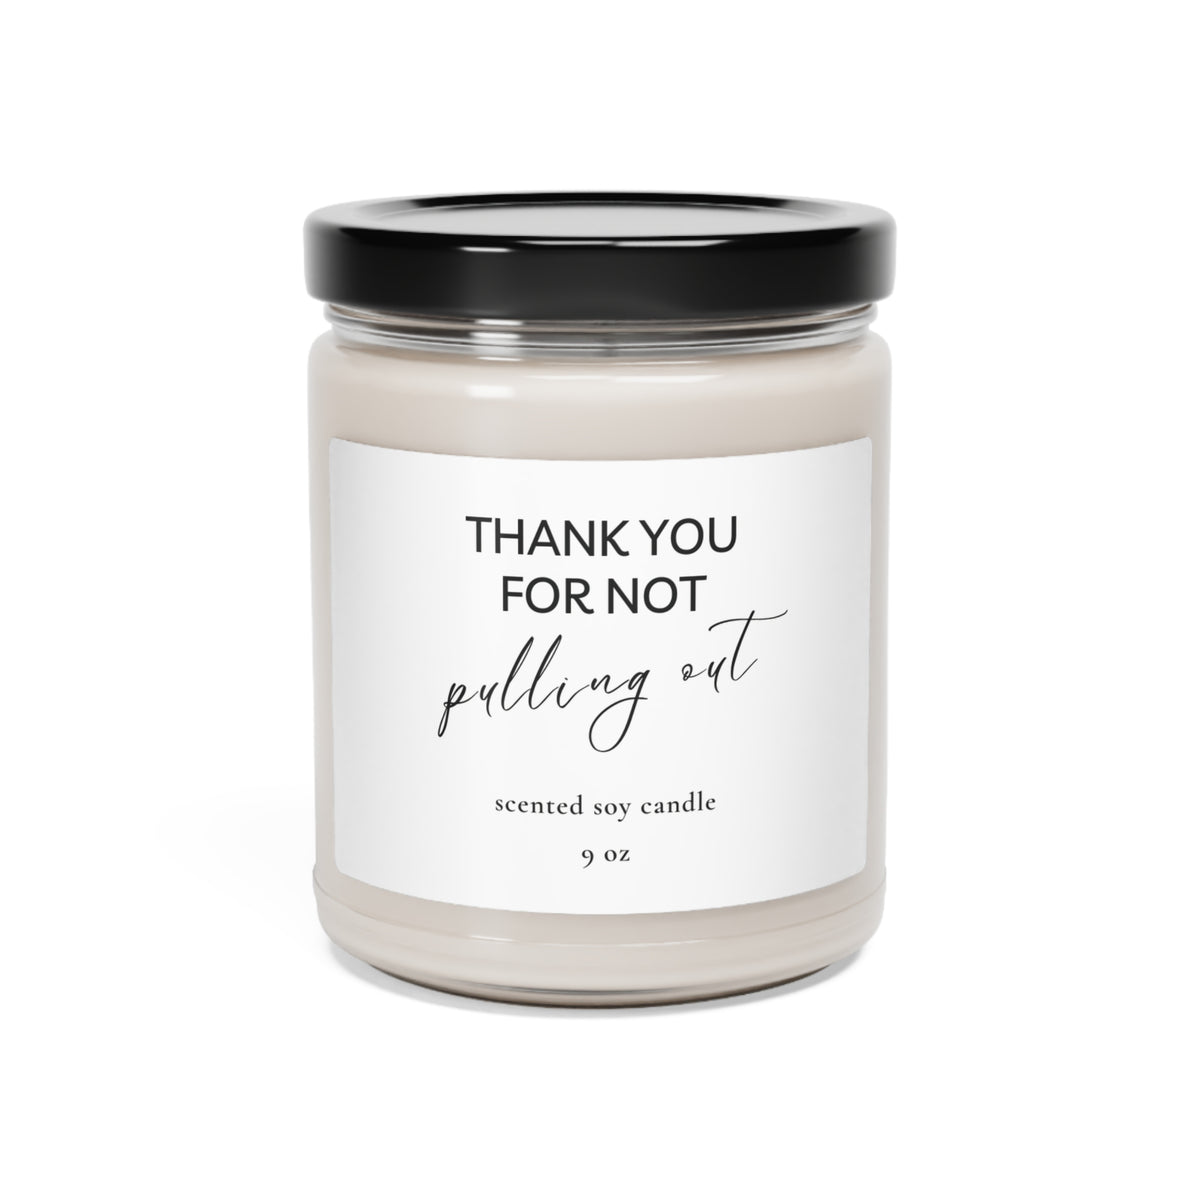 Thank You For Not Pulling Out - Scented Soy Candle, 9oz